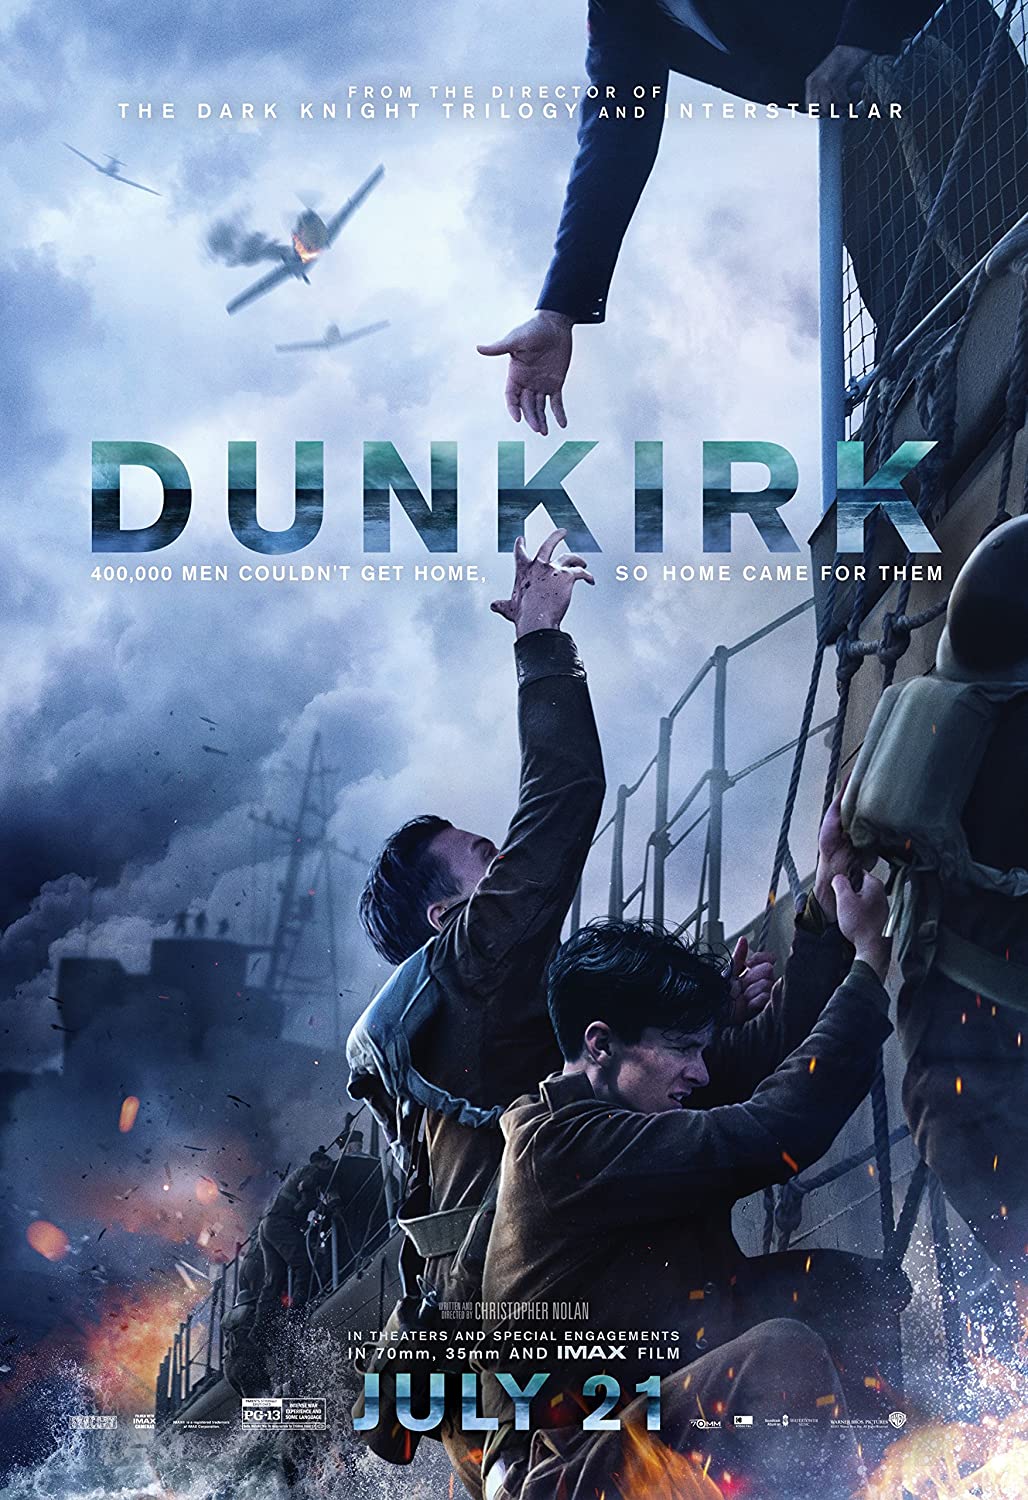 Dunkirk (2017) - Movie/Film Guided Questions